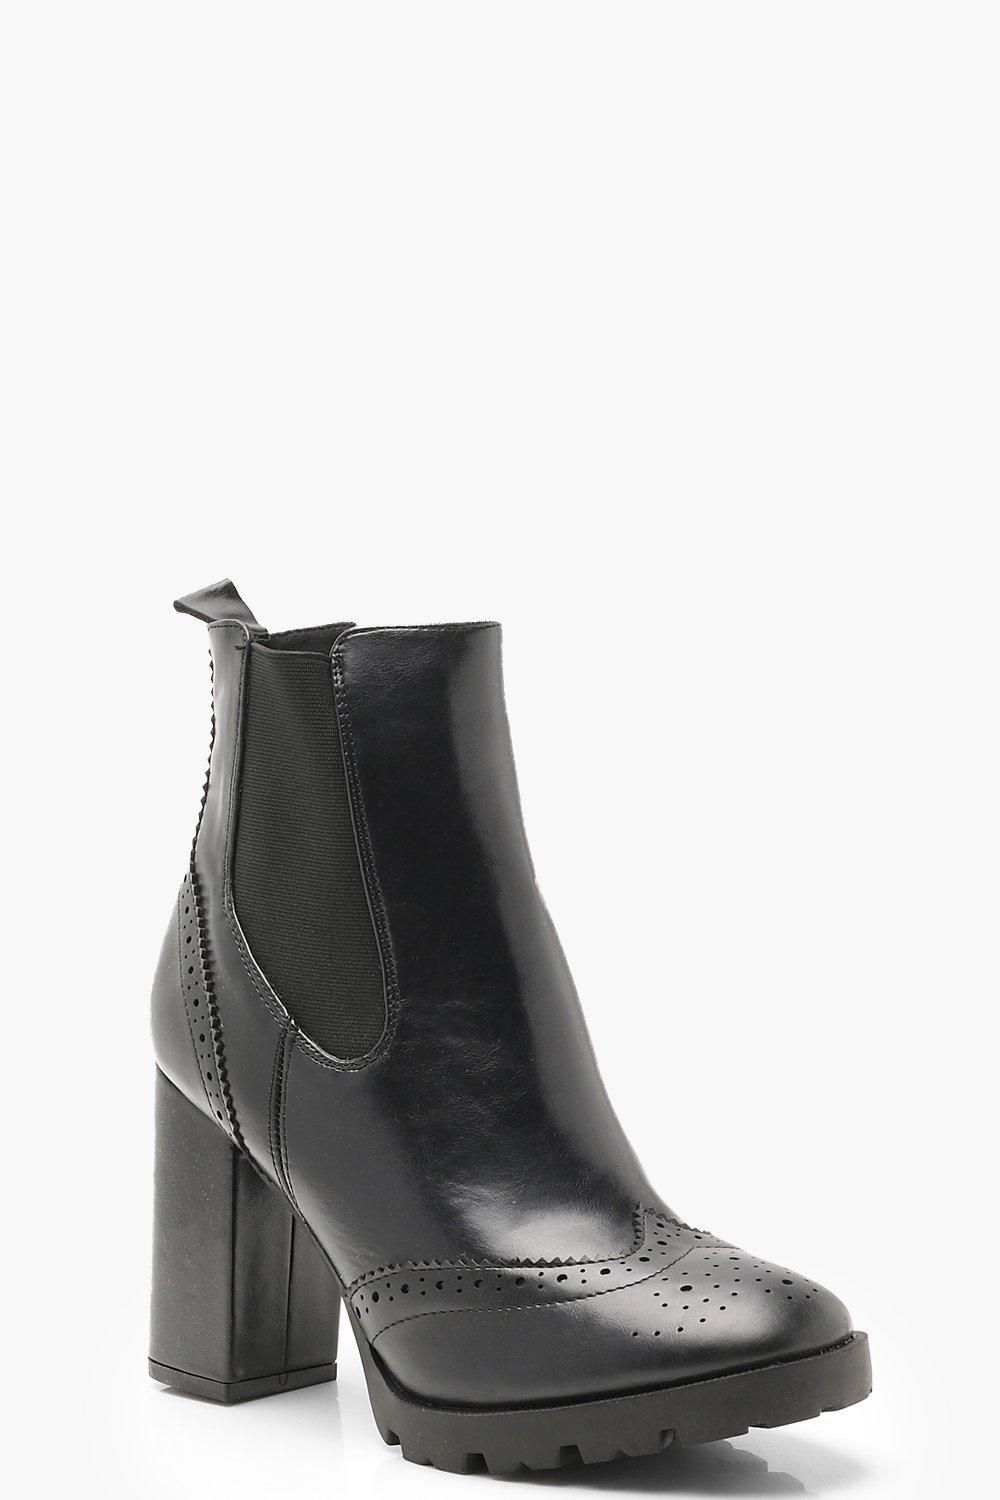 Punch Work Platform Cleated Chelsea Boots | Boohoo.com (US & CA)